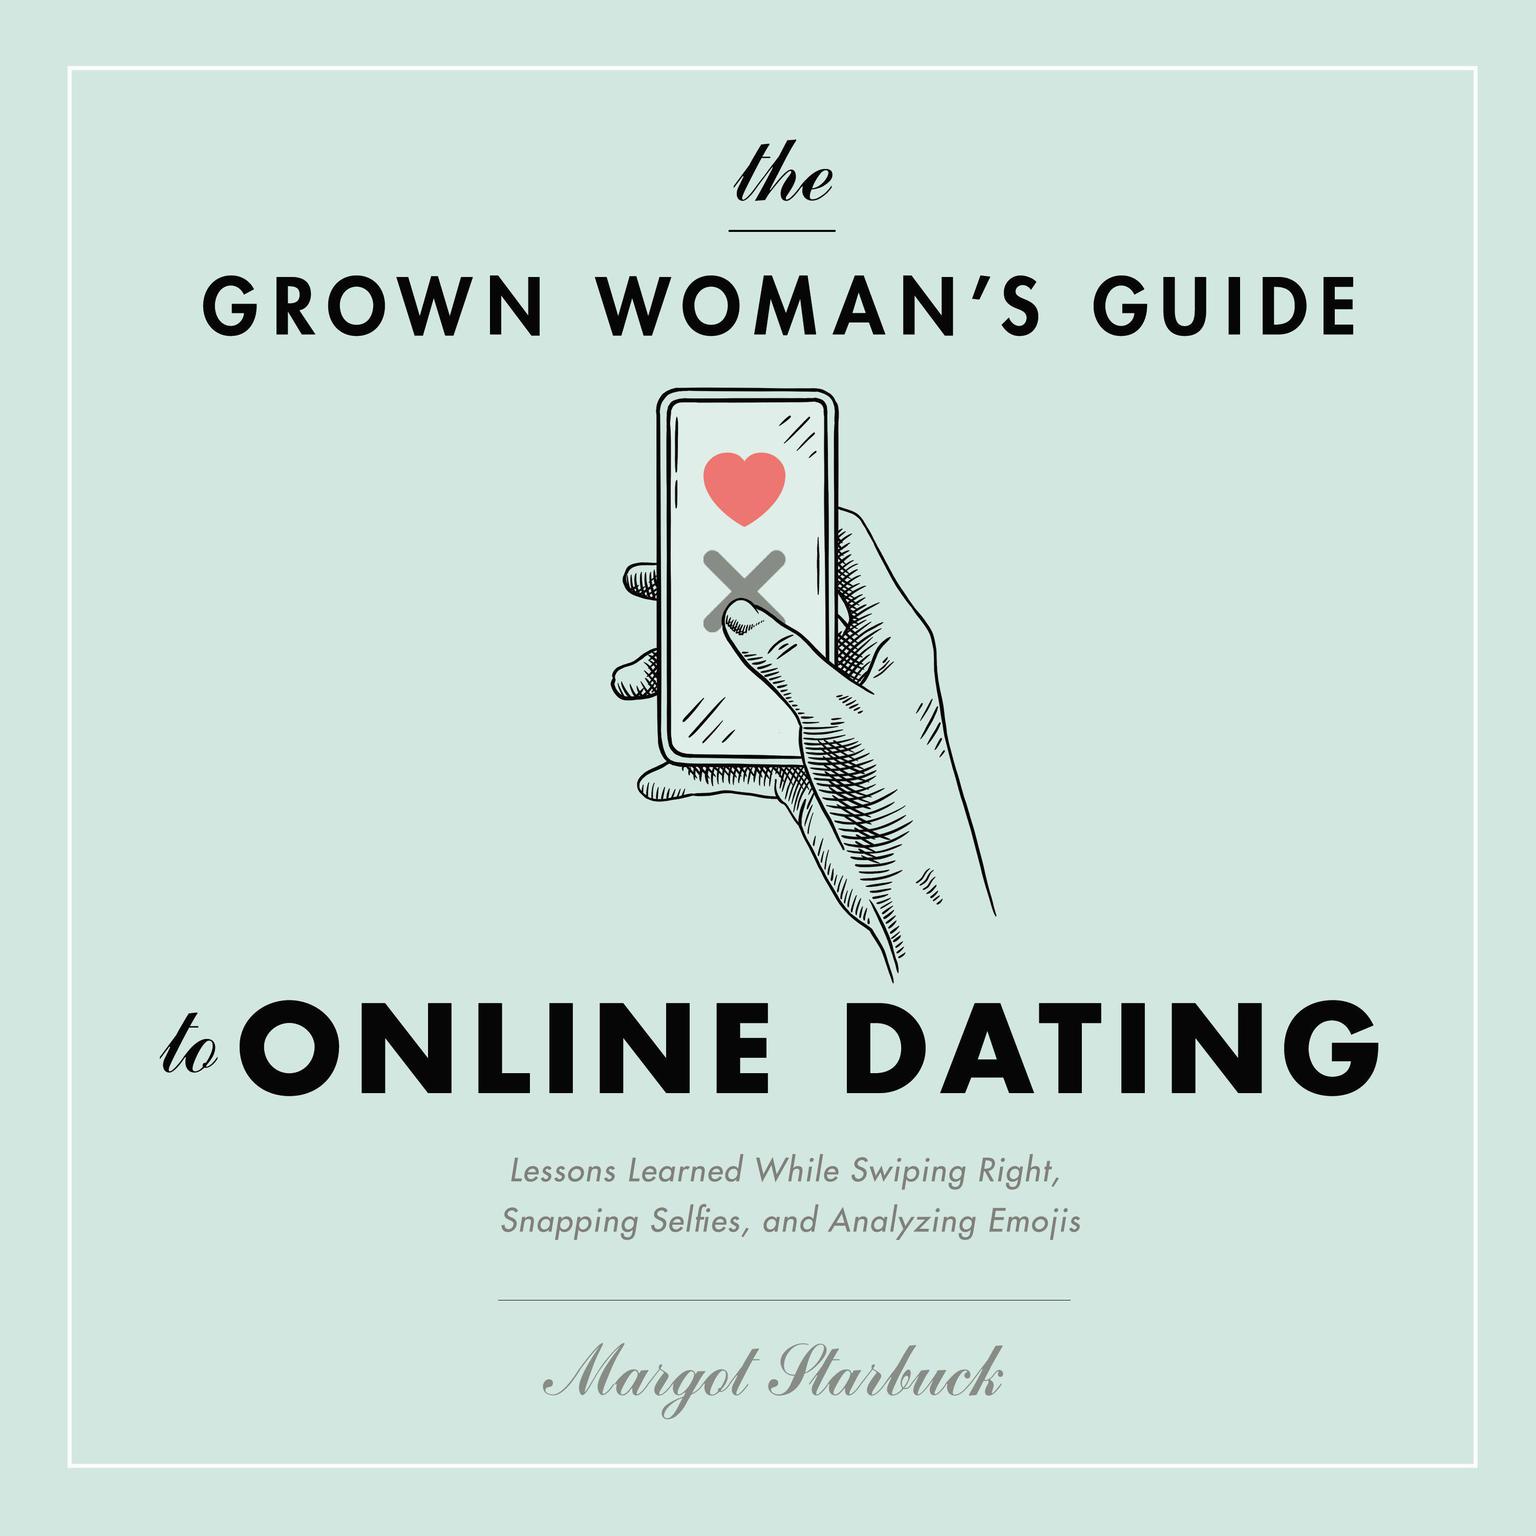 The Grown Womans Guide to Online Dating: Lessons Learned While Swiping Right, Snapping Selfies, and Analyzing Emojis Audiobook, by Margot Starbuck